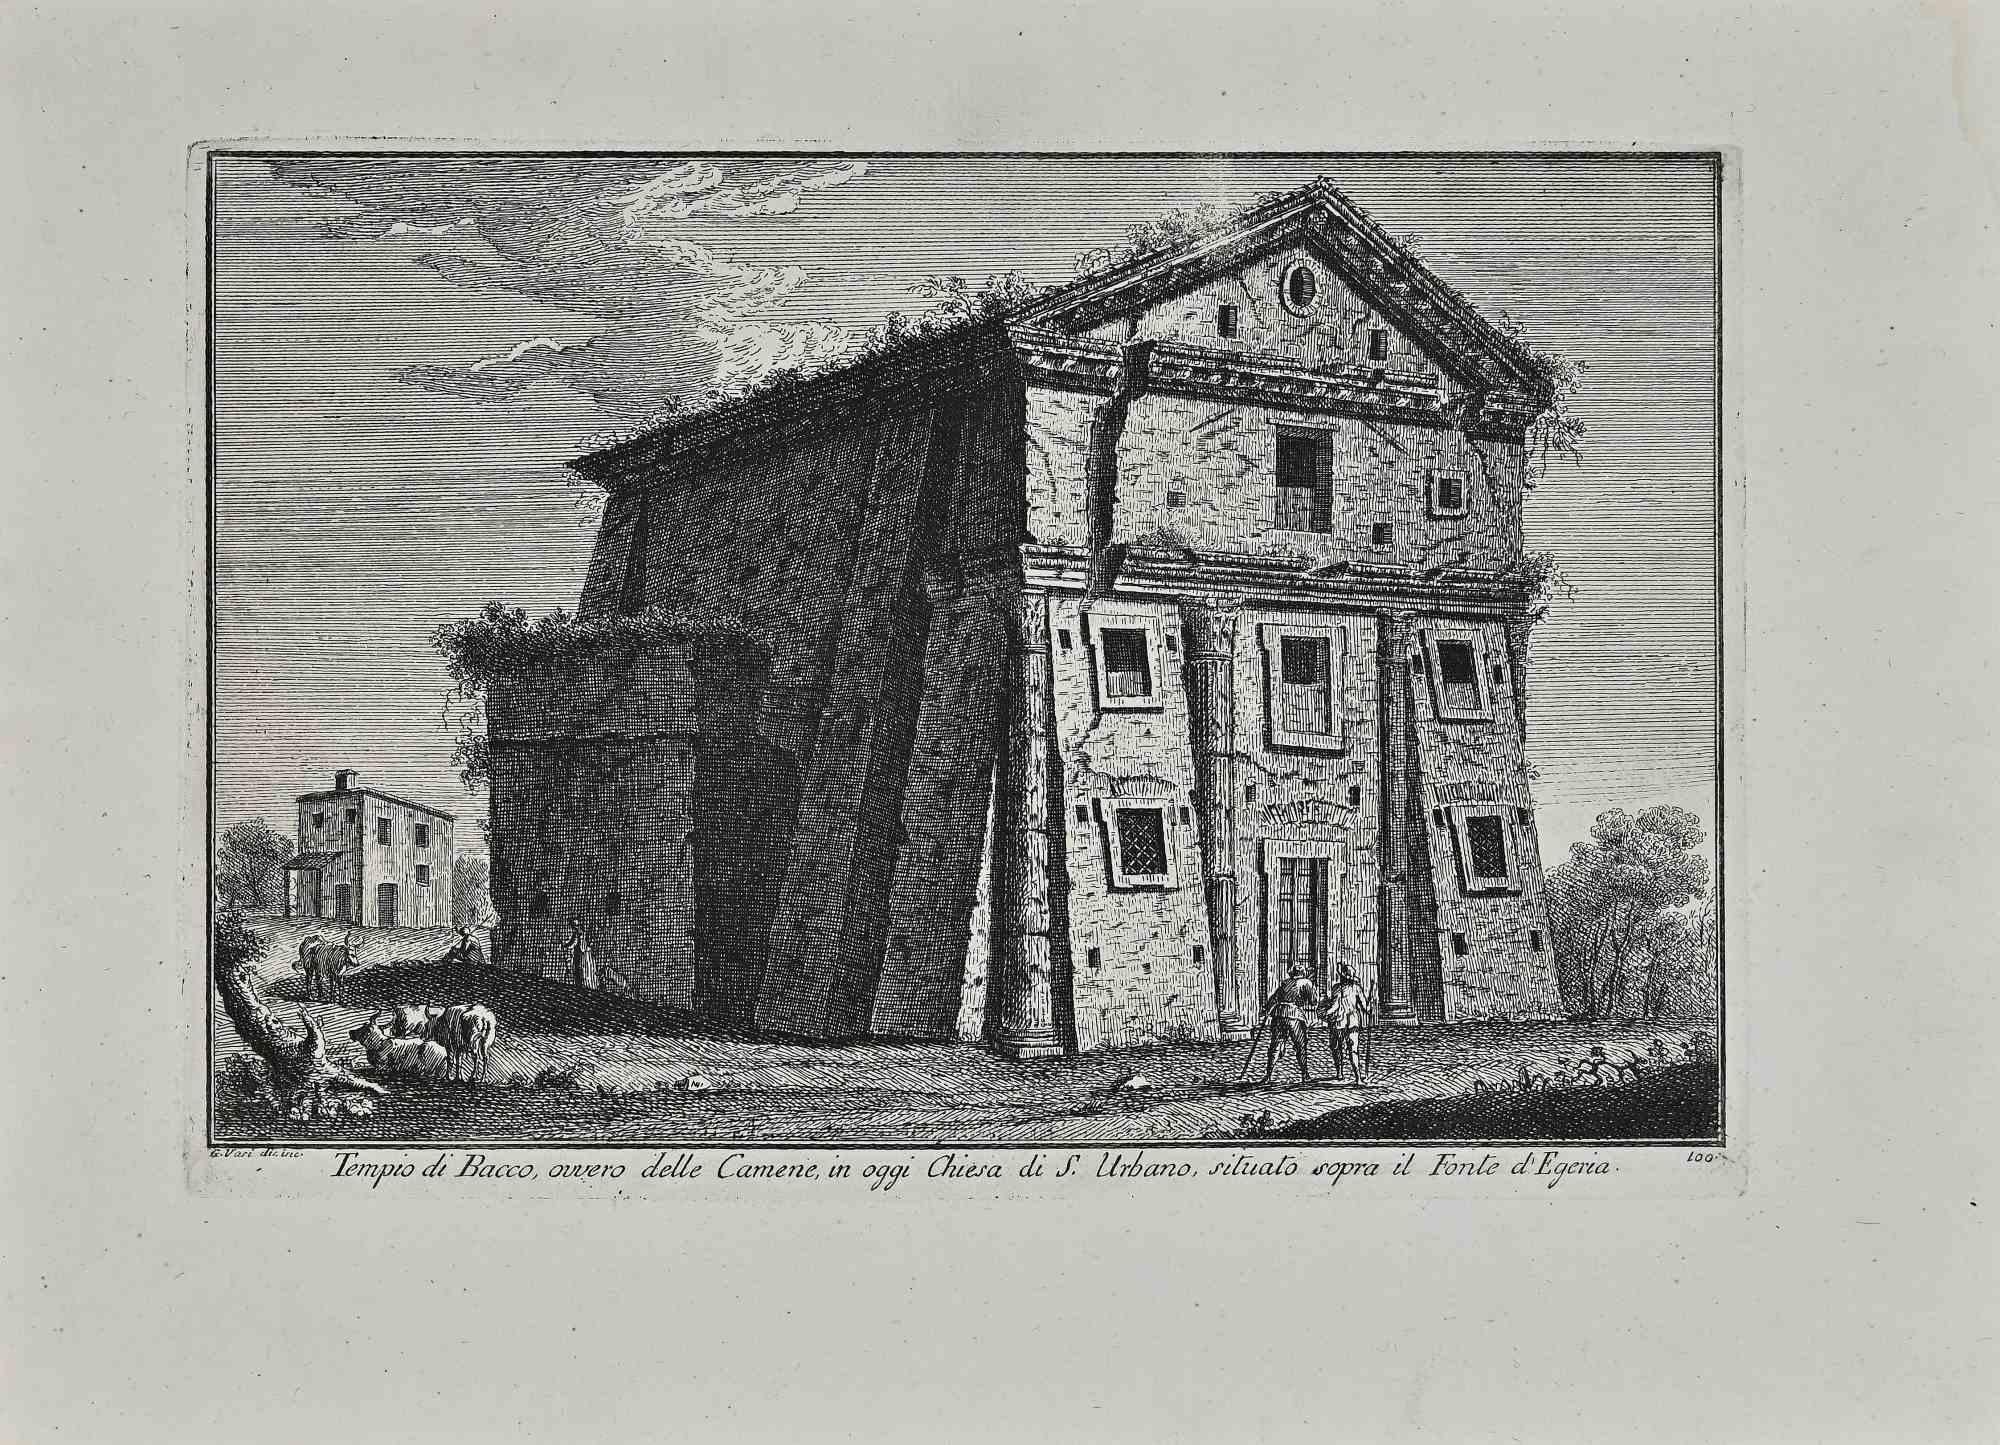 Tempio di Bacco is an original etching of the Late 18th century realized by Giuseppe Vasi.

Signed and titled on plate lower margin. 

Good conditions.

Giuseppe Vasi  (Corleone,1710 - Rome, 1782) was an engraver, architect, and landscape artist.